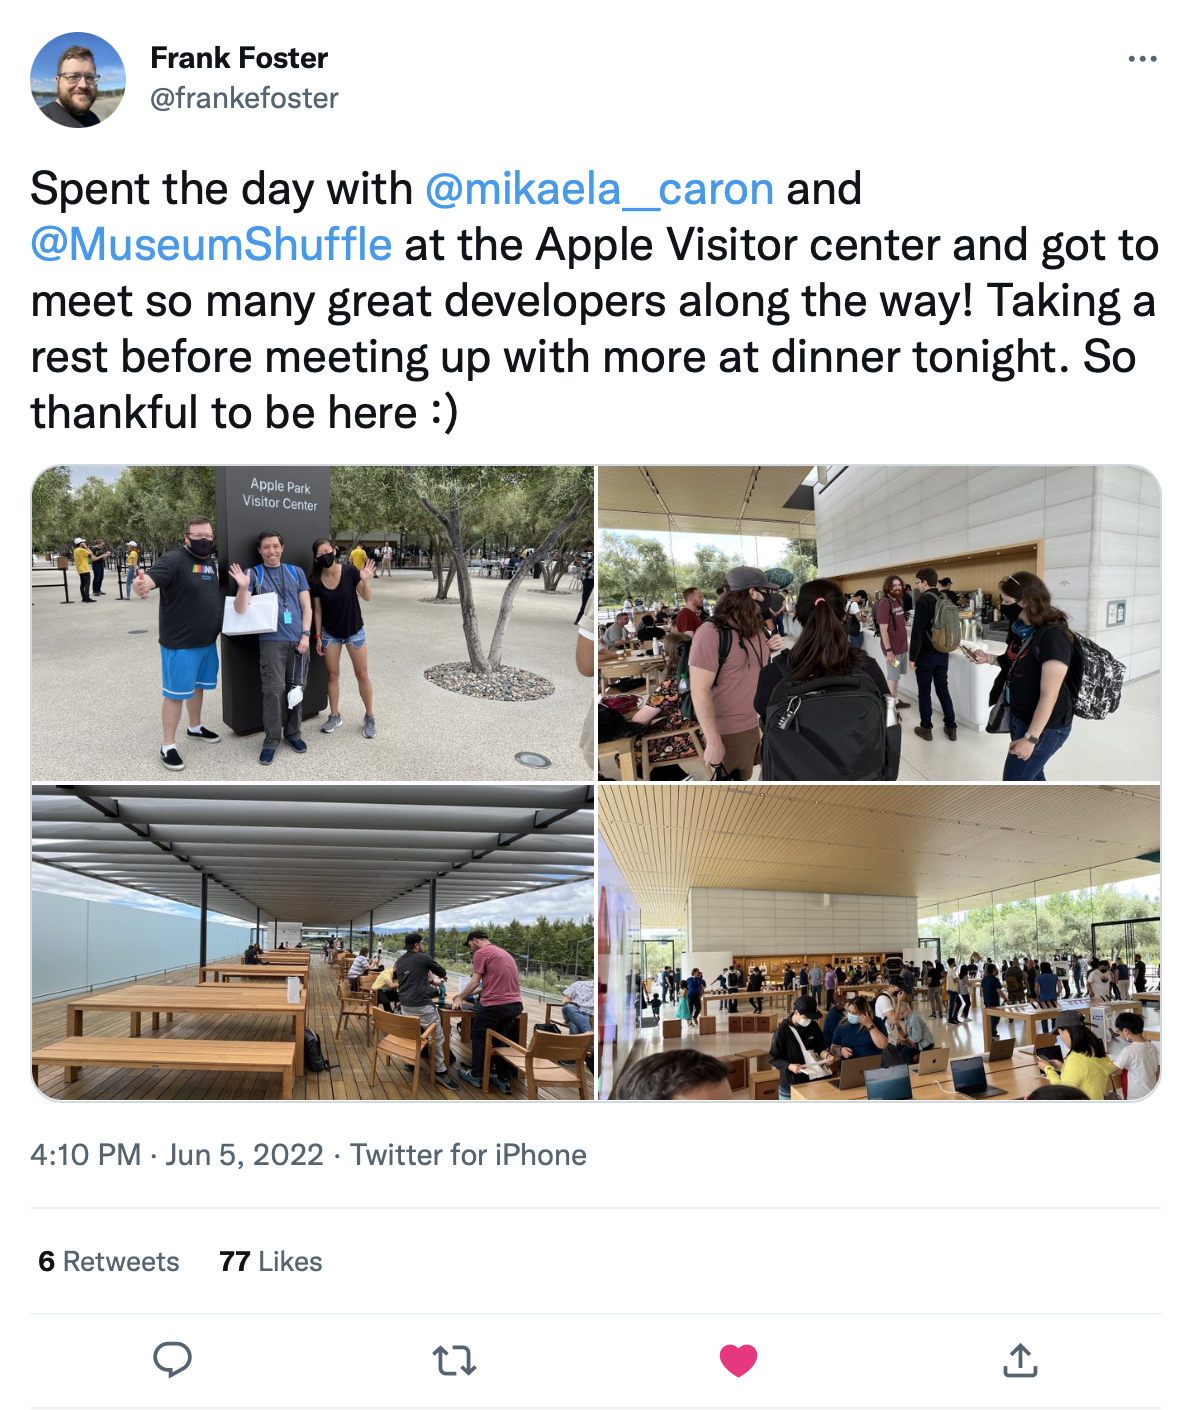 Frank posting about hanging out with Twitter friends IRL at WWDC22